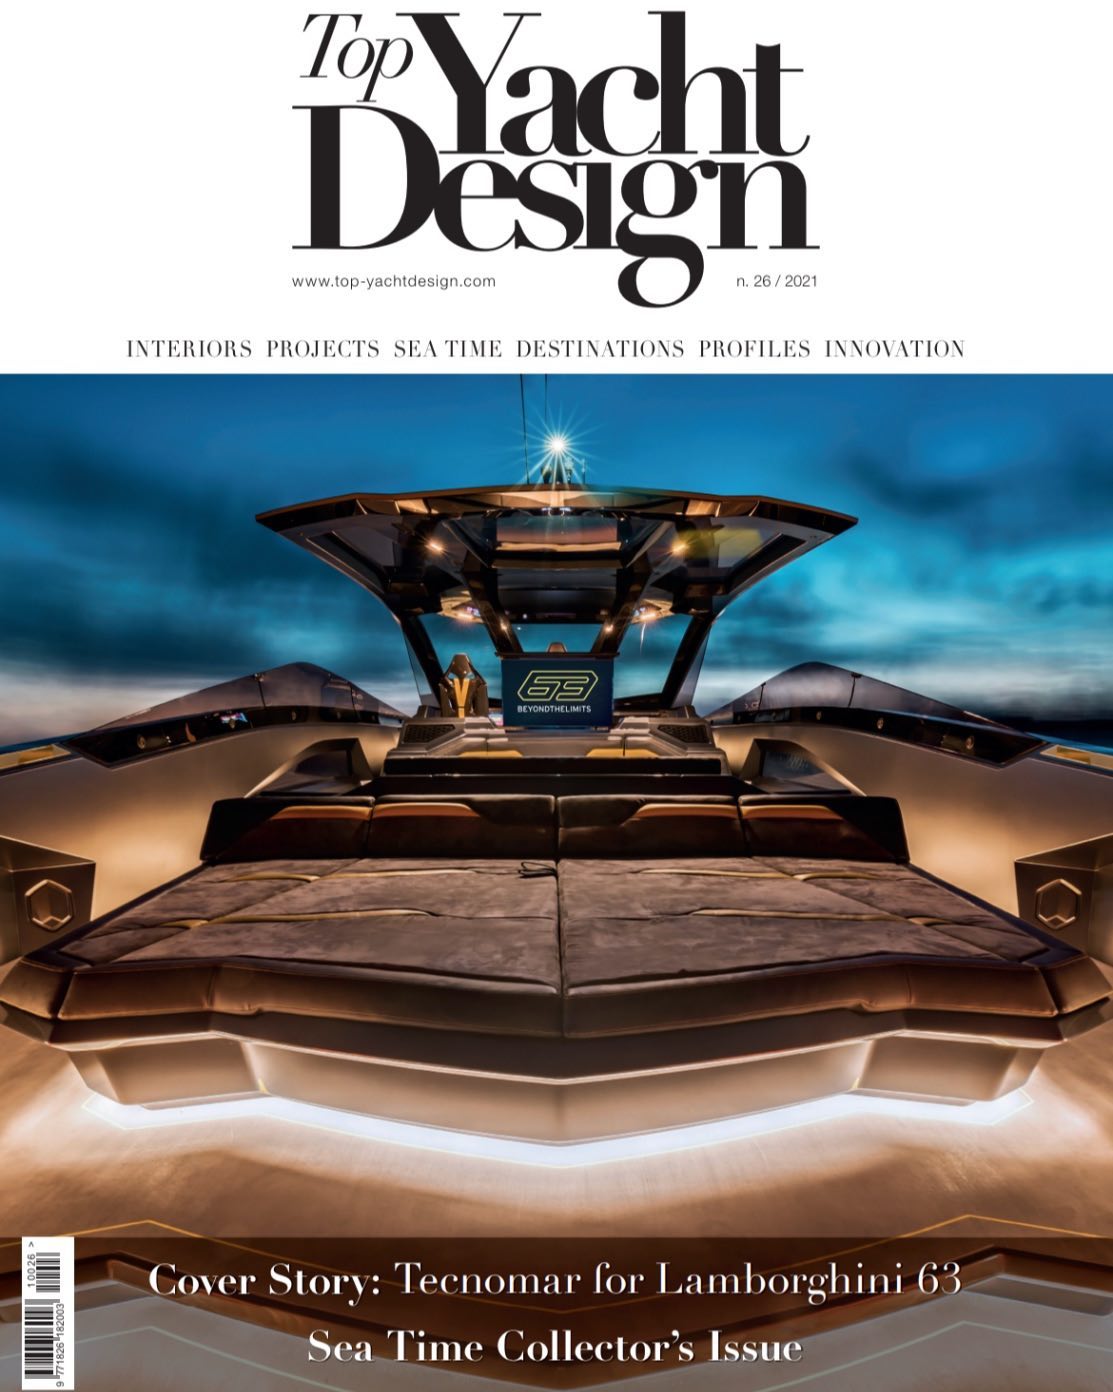 Top Yacht Design, issue 26/2021